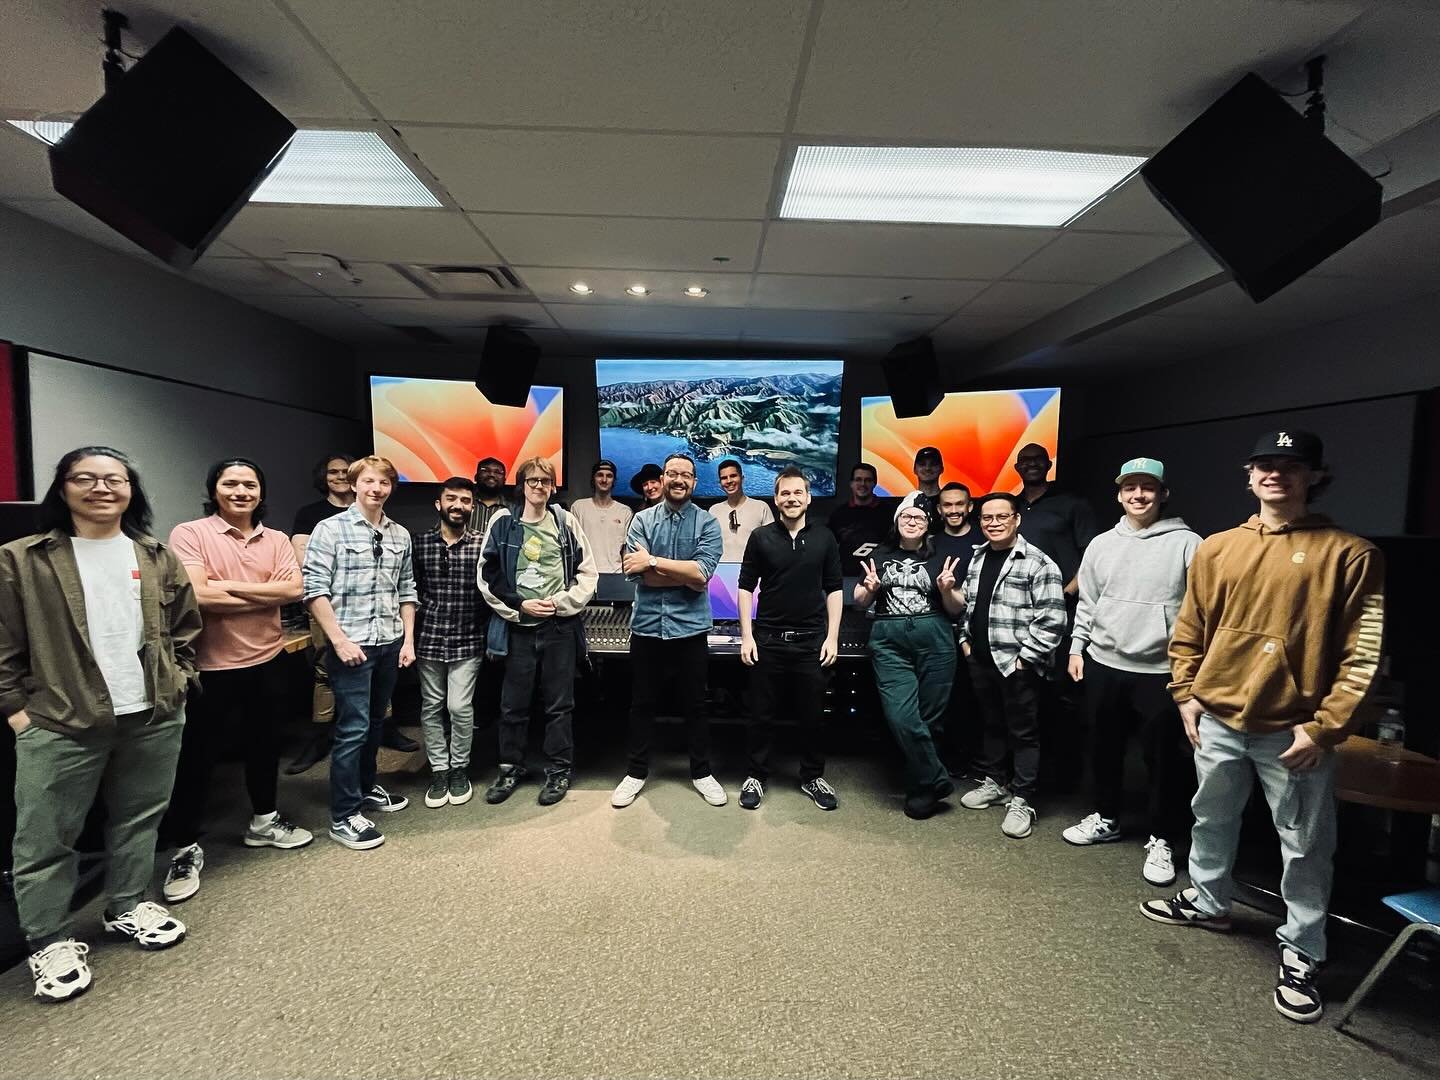 Over the past year our director and owner @mikemons has carried out a weekly professorship at Fanshawe College&rsquo;s Audio Post Production program.  Congratulations to the graduates, students and collaborators on a very successful year.  Special th